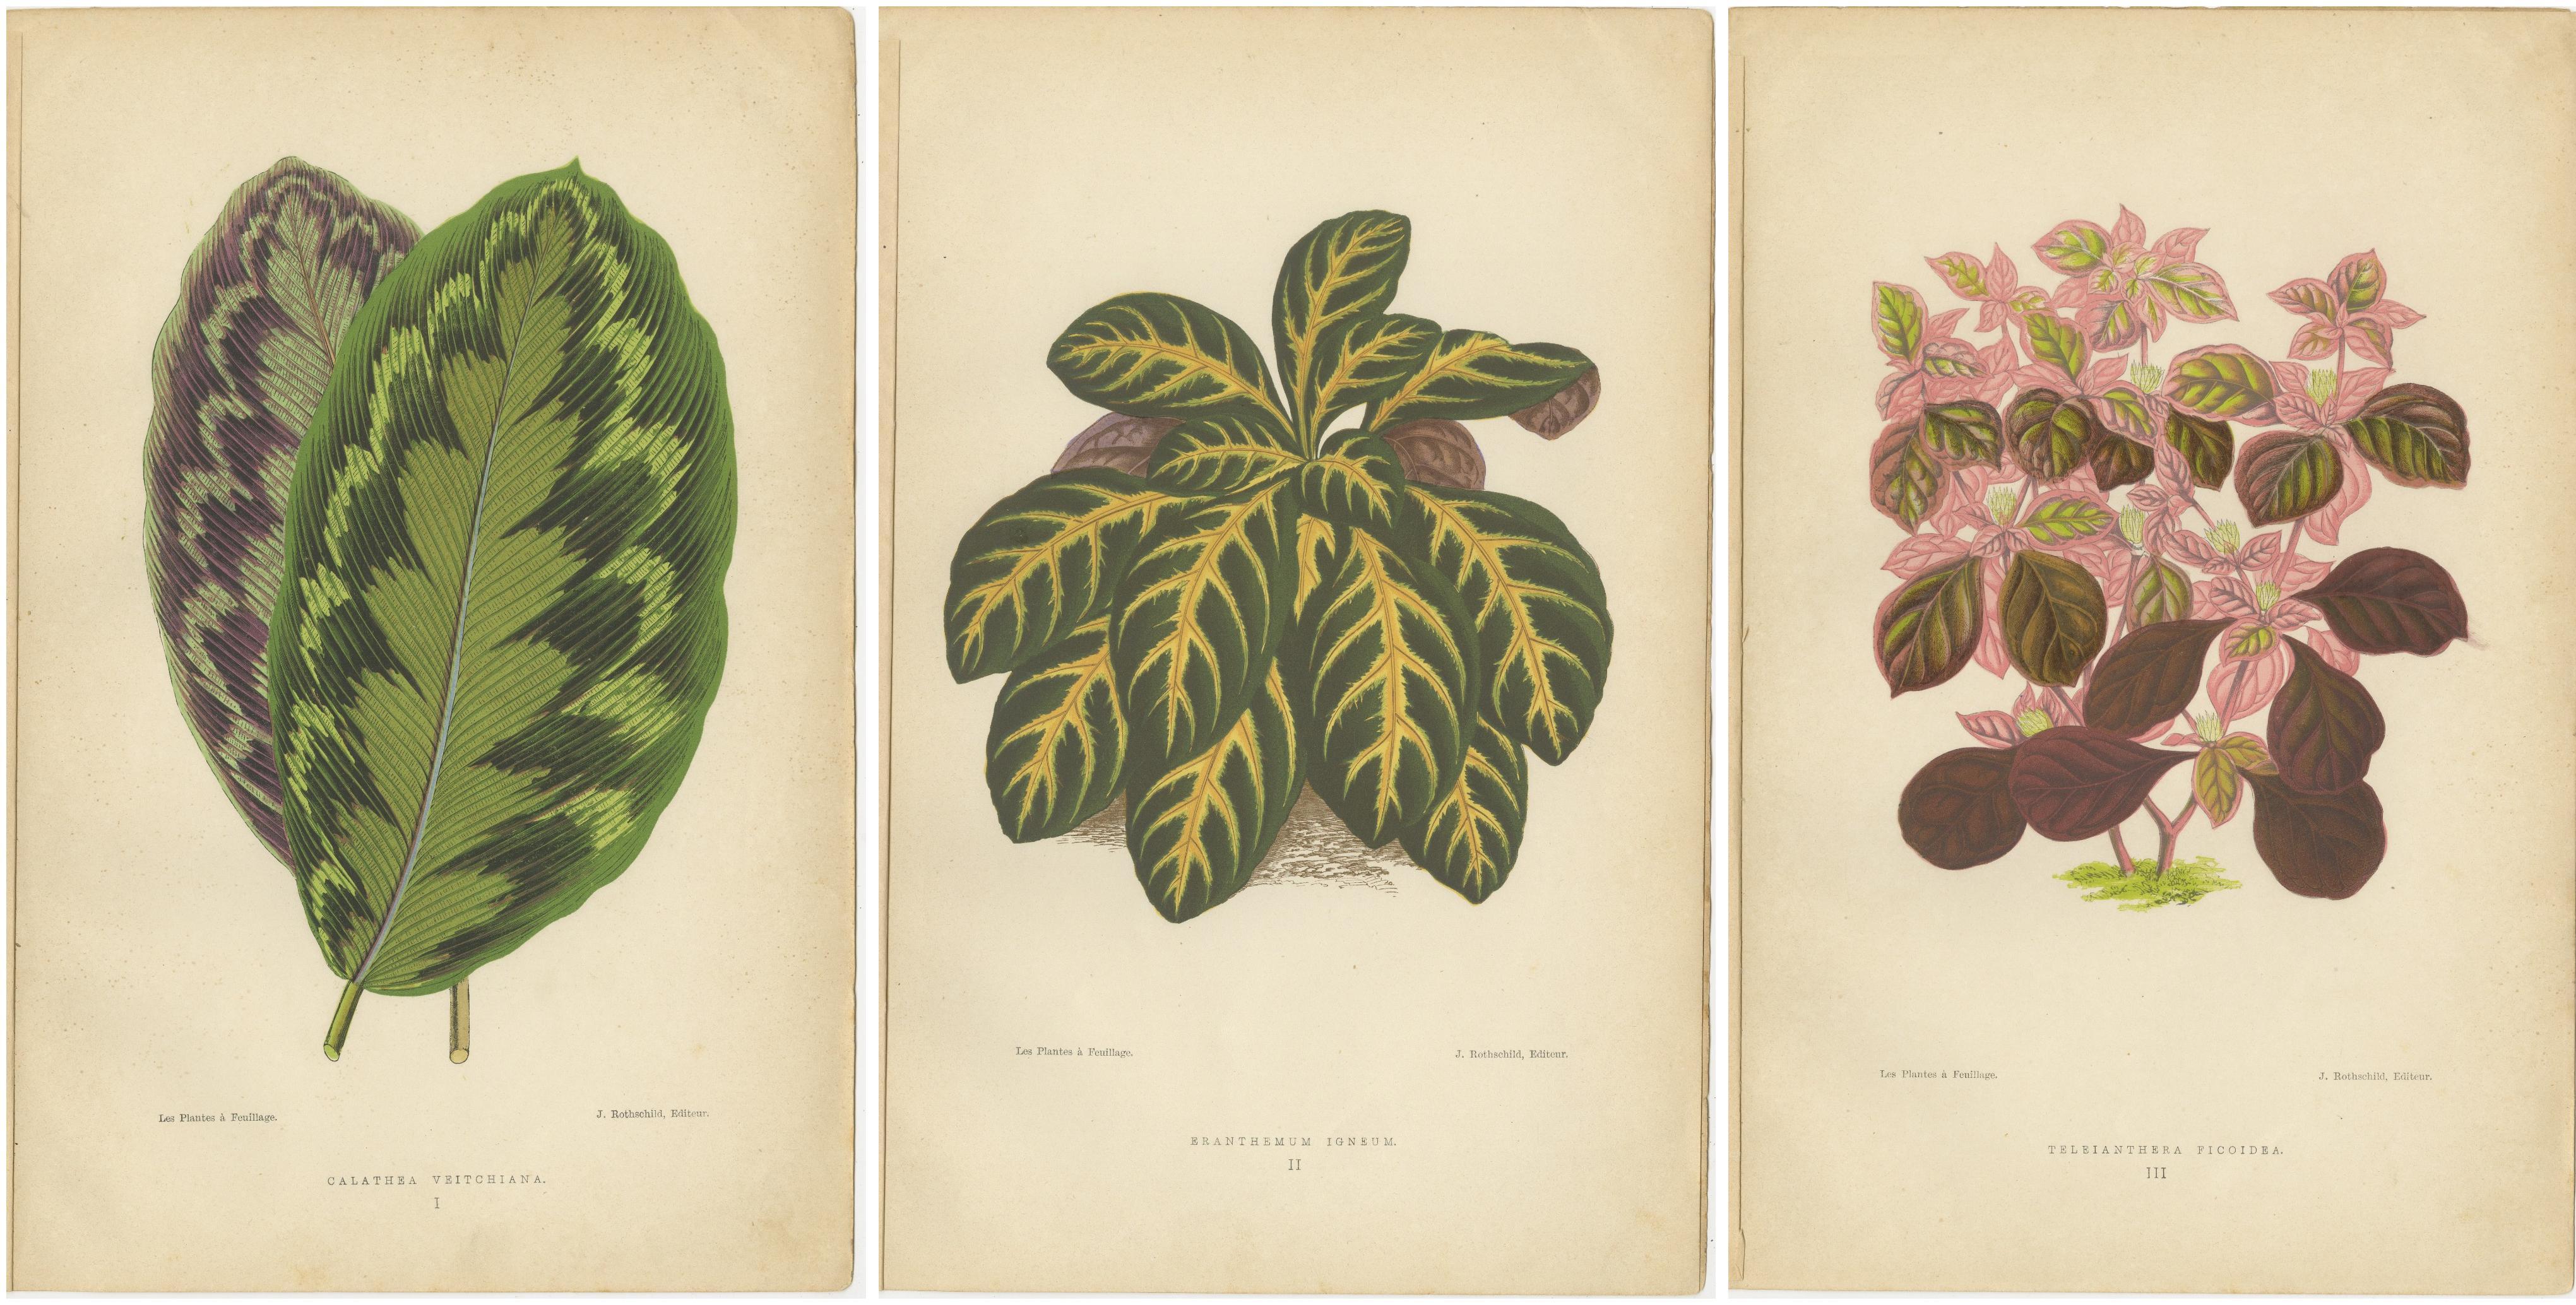 These are beautifully detailed botanical illustrations from the second volume of 